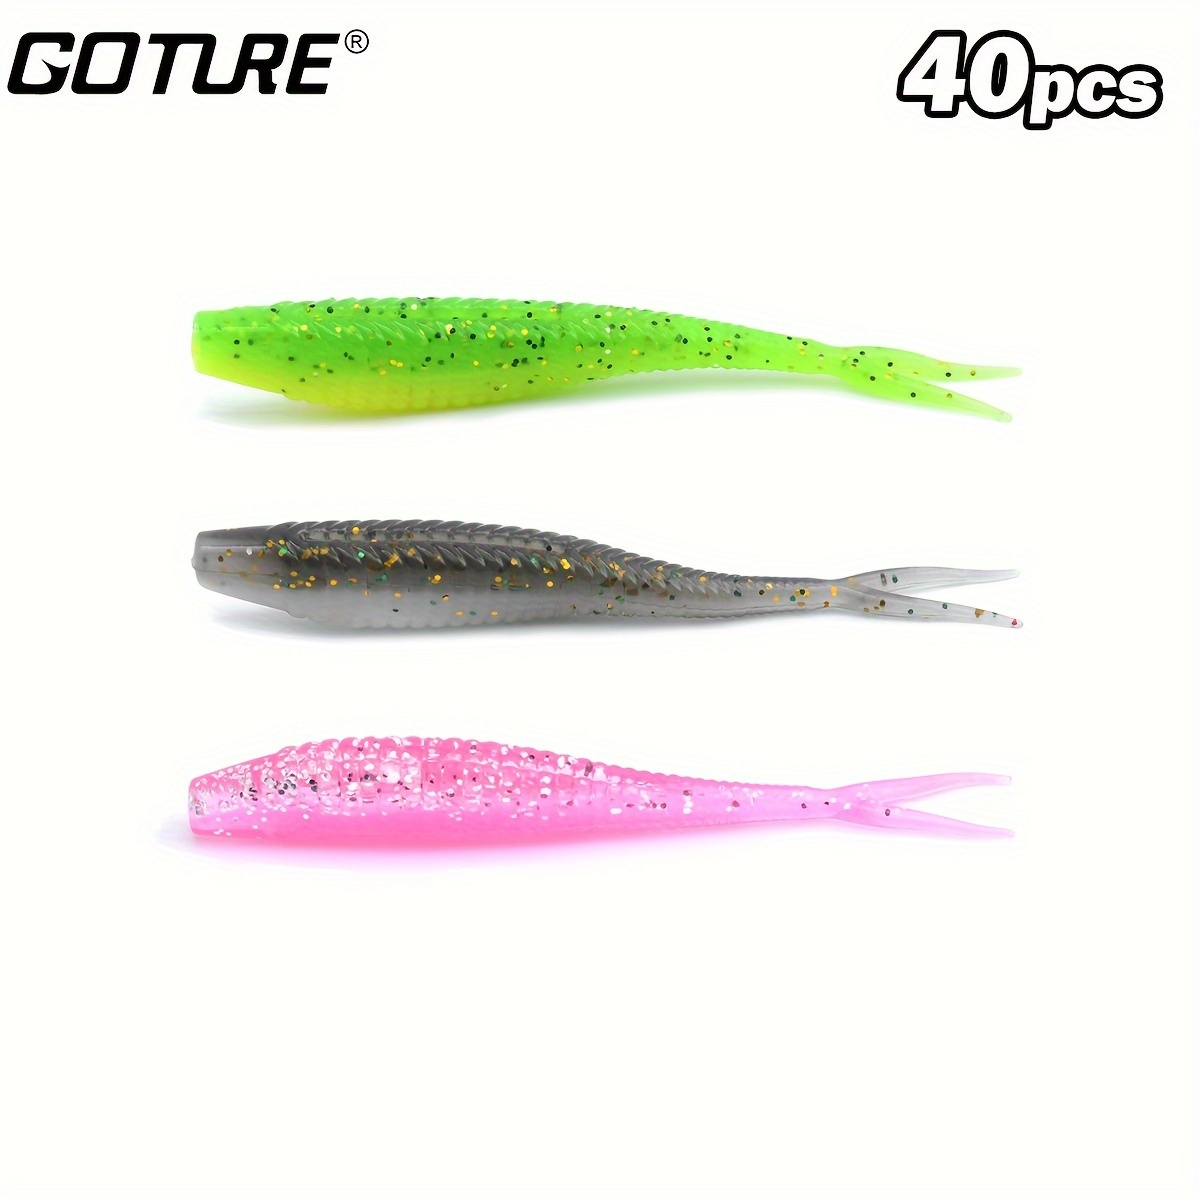 Goture Needlefish Soft Lures, Lead Head Jigs with Pre-Rigged Ultra-Sharp  Realistic Swimbait for Trout Pike Walleye Saltwater/Freshwater Fishing Blue  A /4.13'' - 3/4 oz